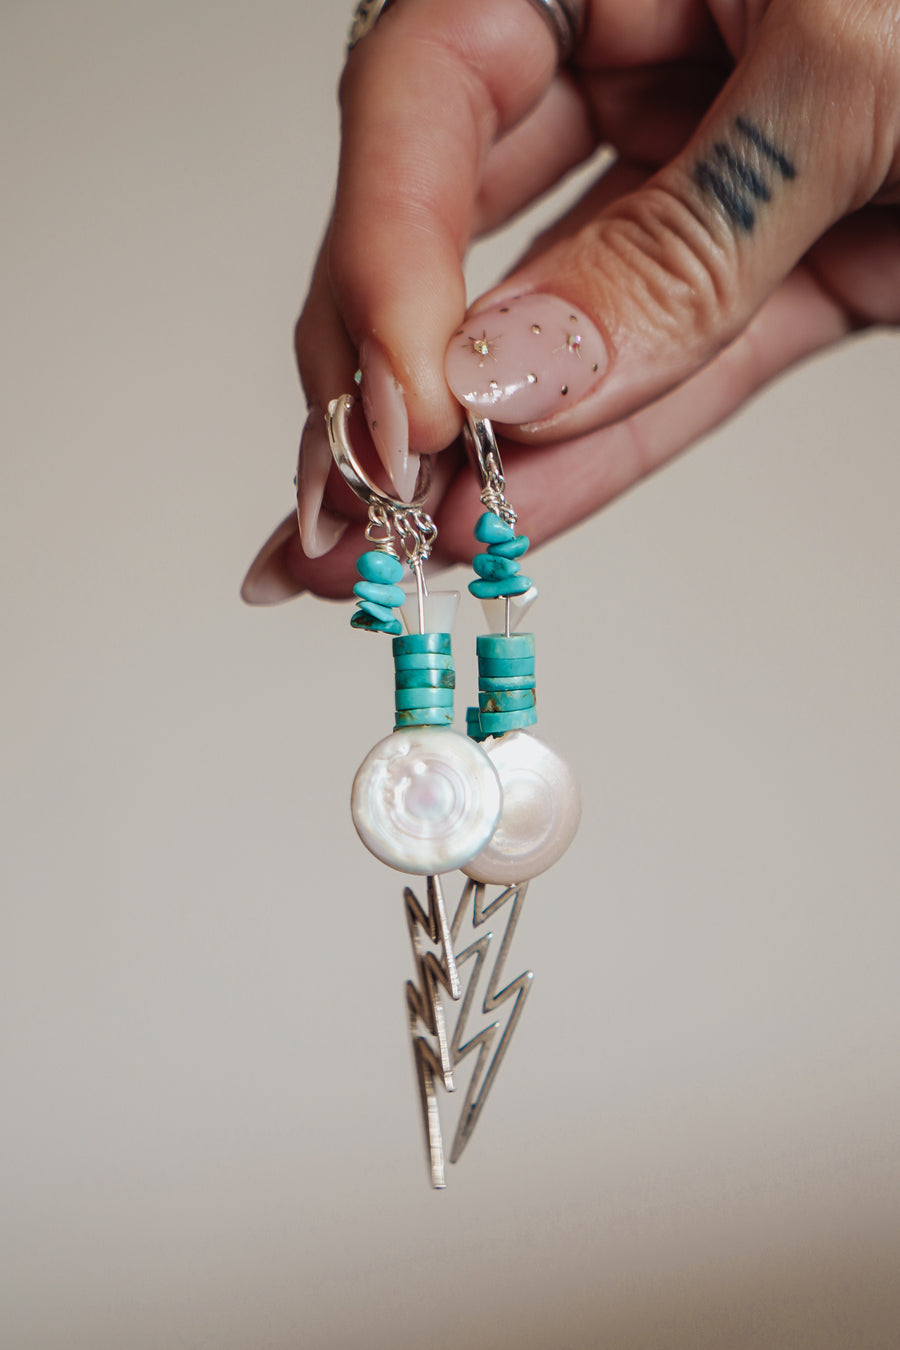 Charmed Earrings in Blue Ridge Turquoise, Mother of Pearl Beads & Sterling Silver Bolt